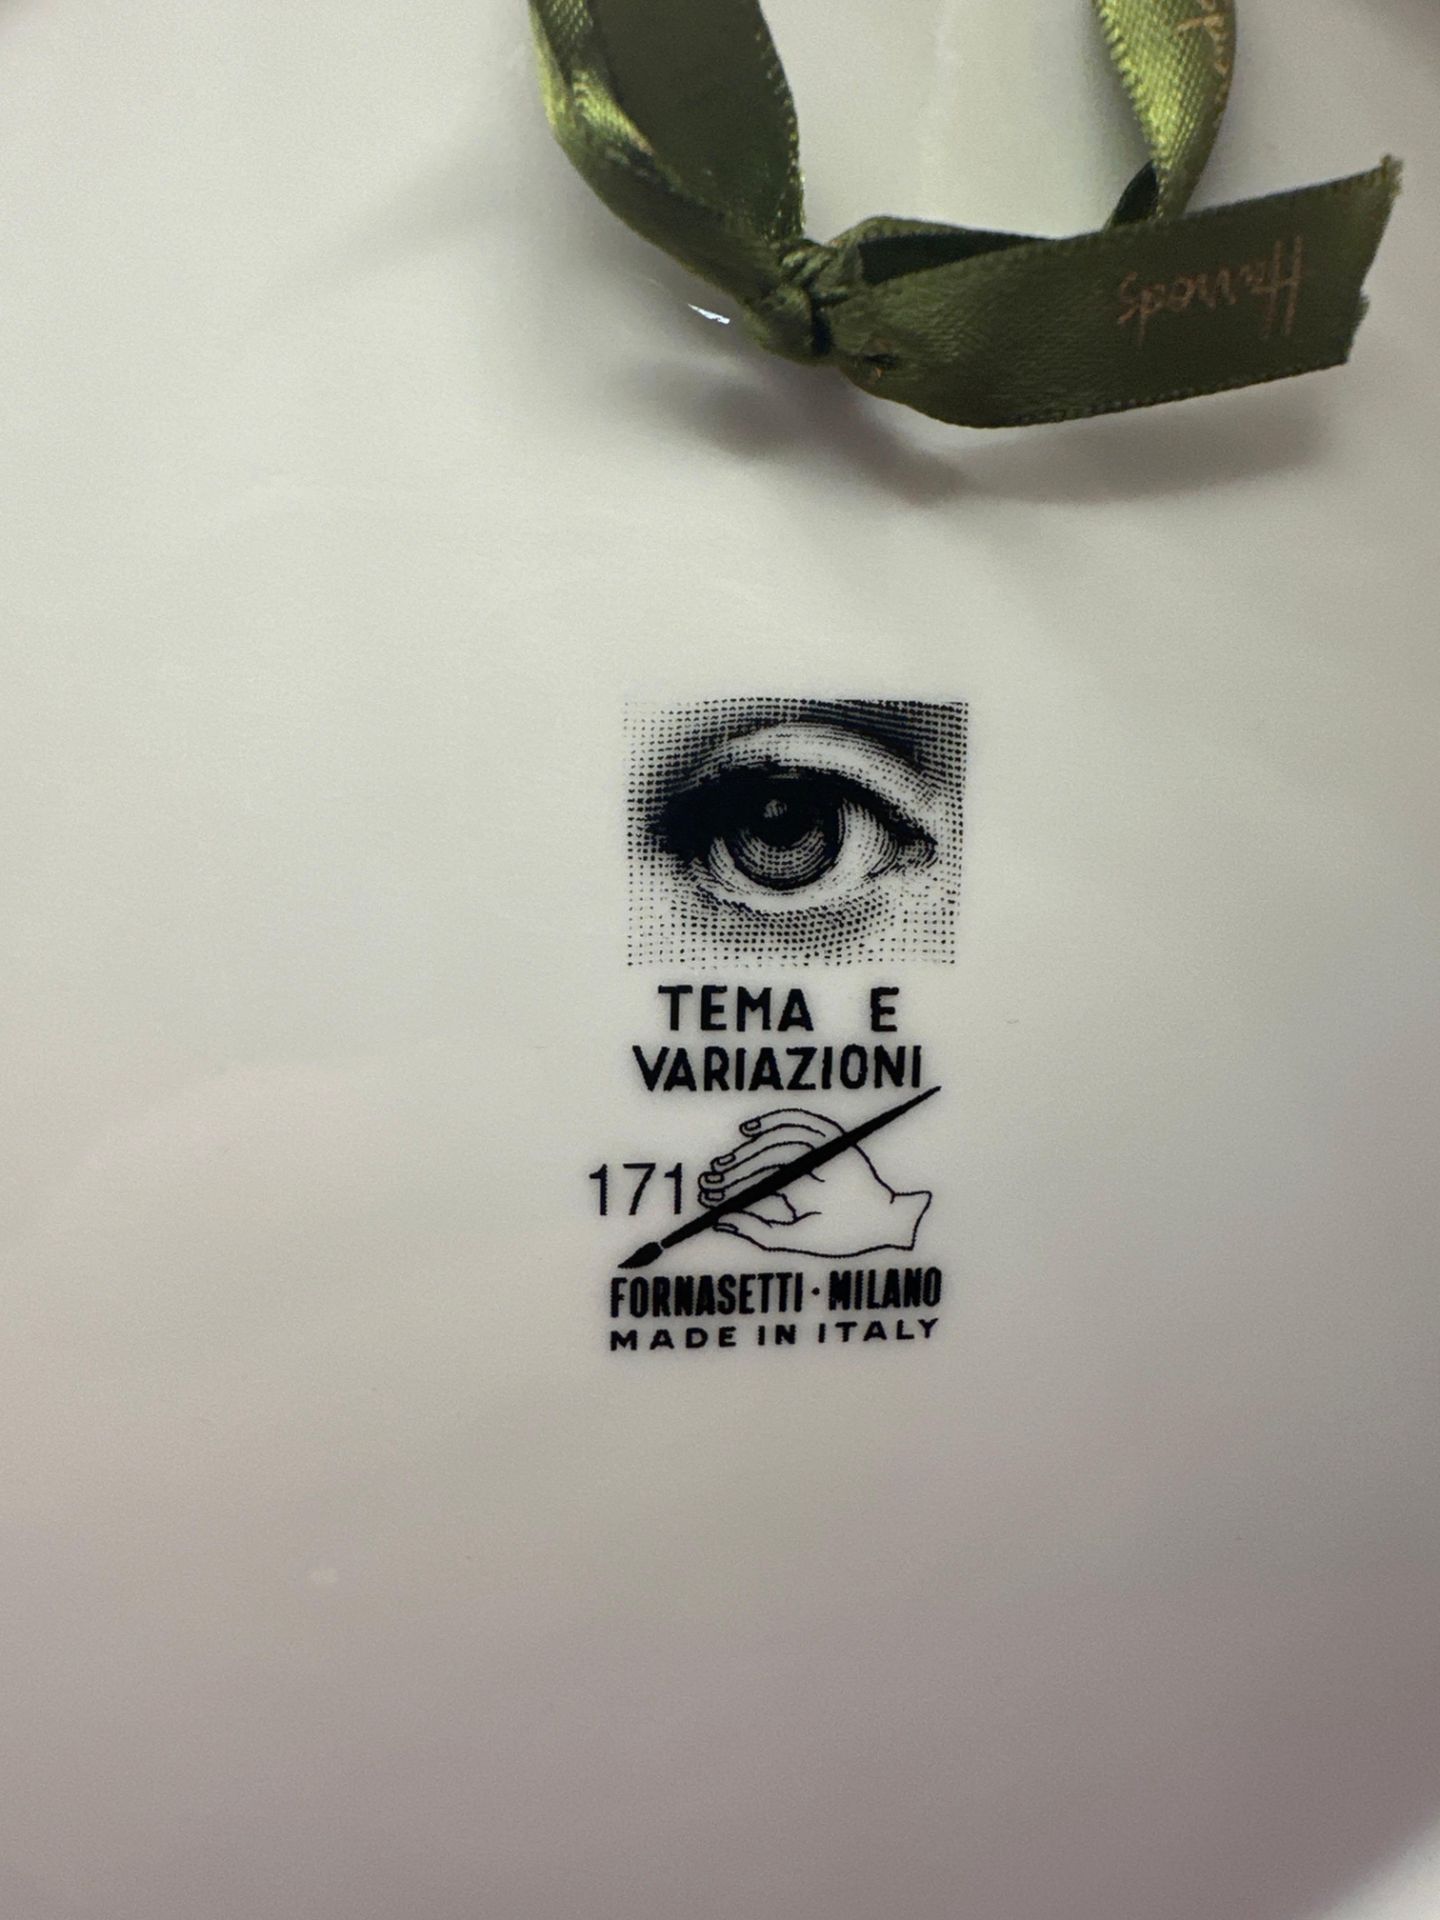 Fornasetti Italy Porcelain Tema E Variazioni No. 171 Wall Plate Presented In A Fornasetti Box The - Image 3 of 4